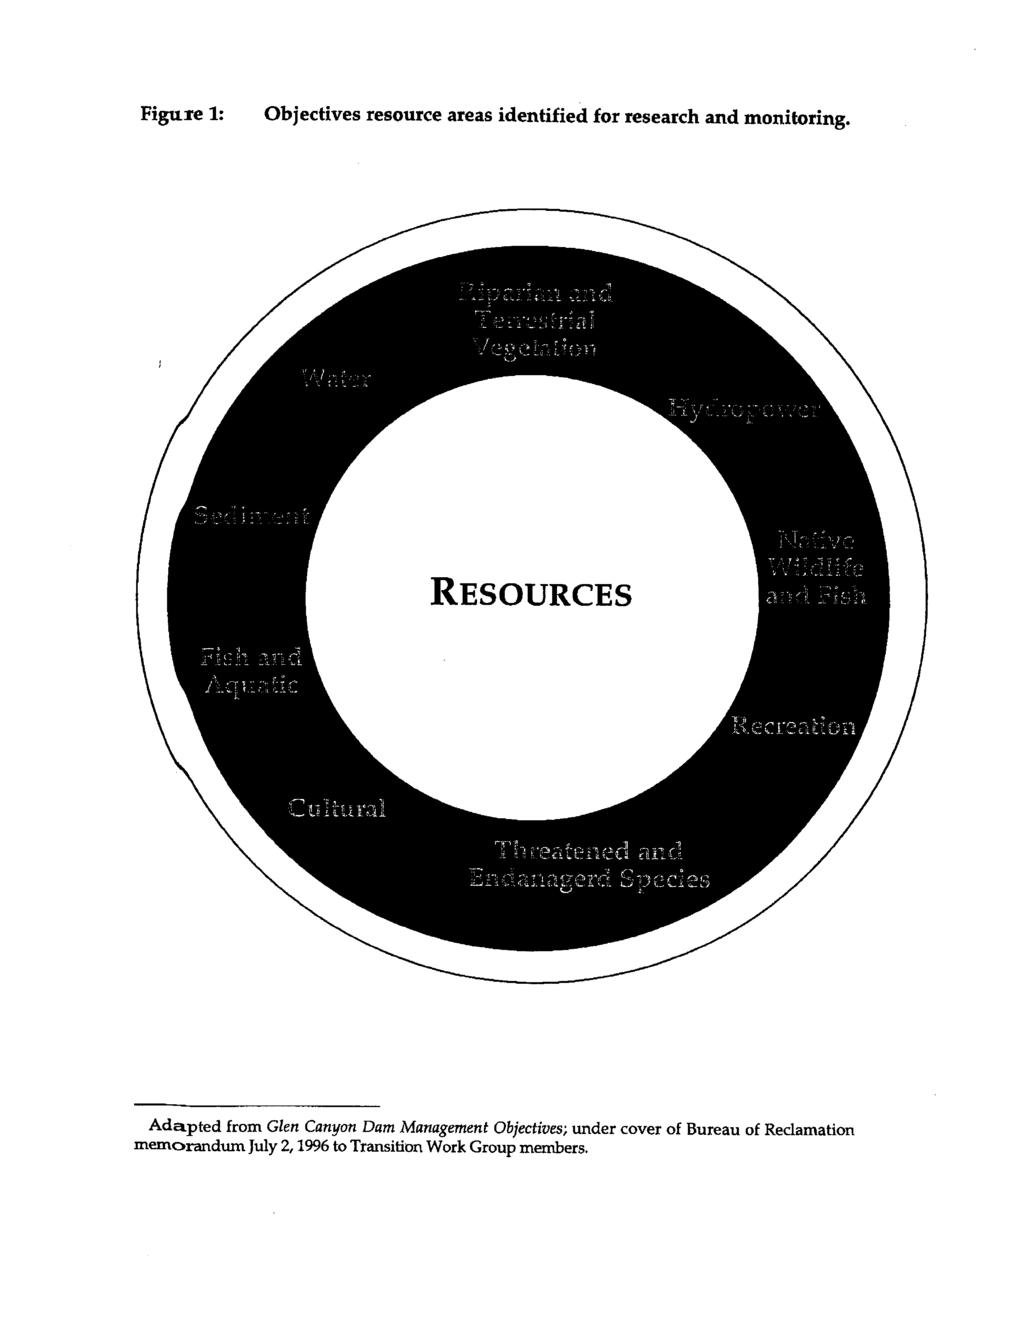 Figure 1: Objectives resource areas identified for research and monitoring.